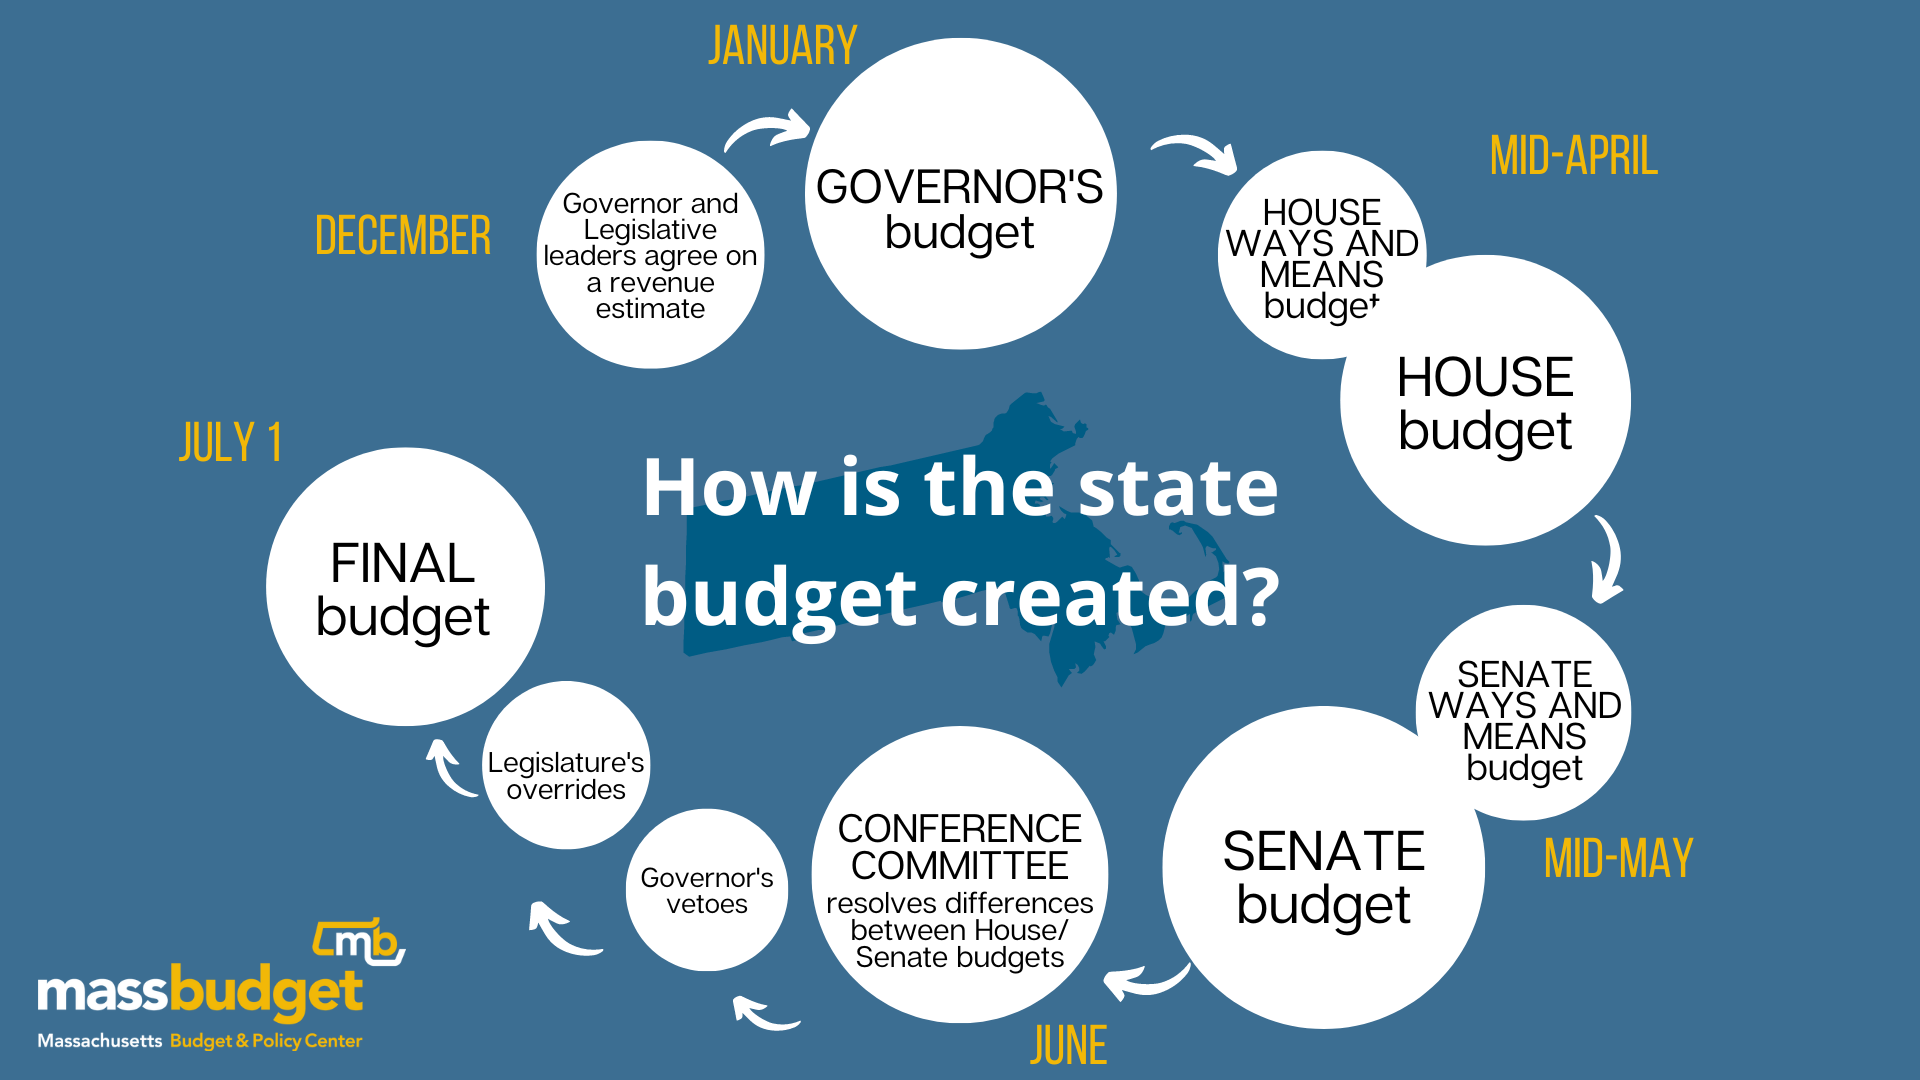 How is the state budget created?